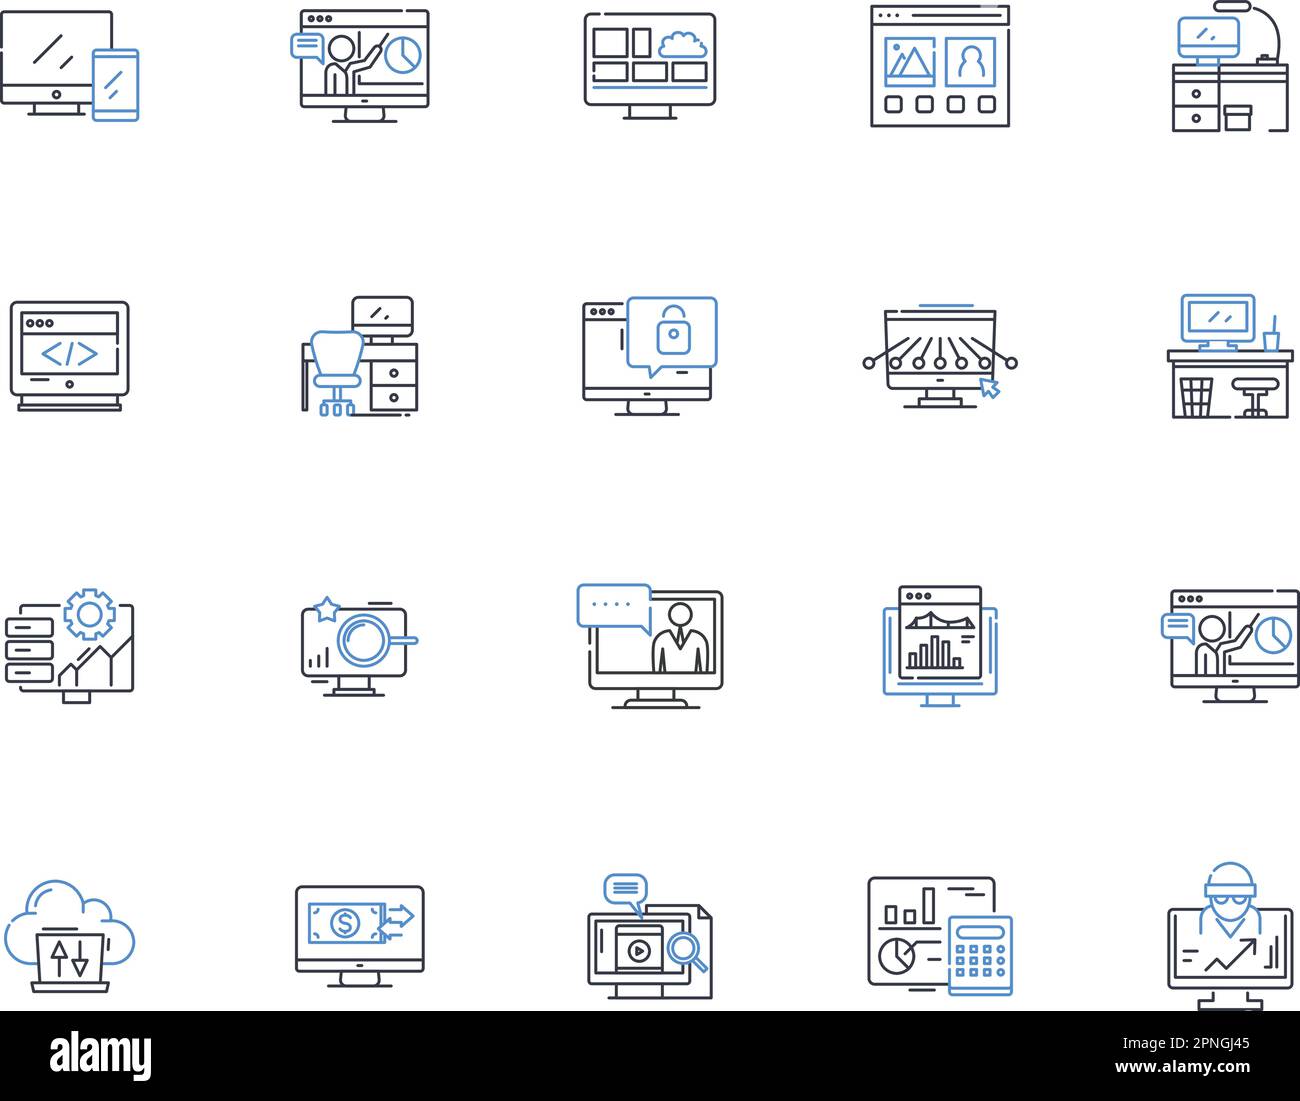 Cloud data line icons collection. Storage, Backup, Security ...